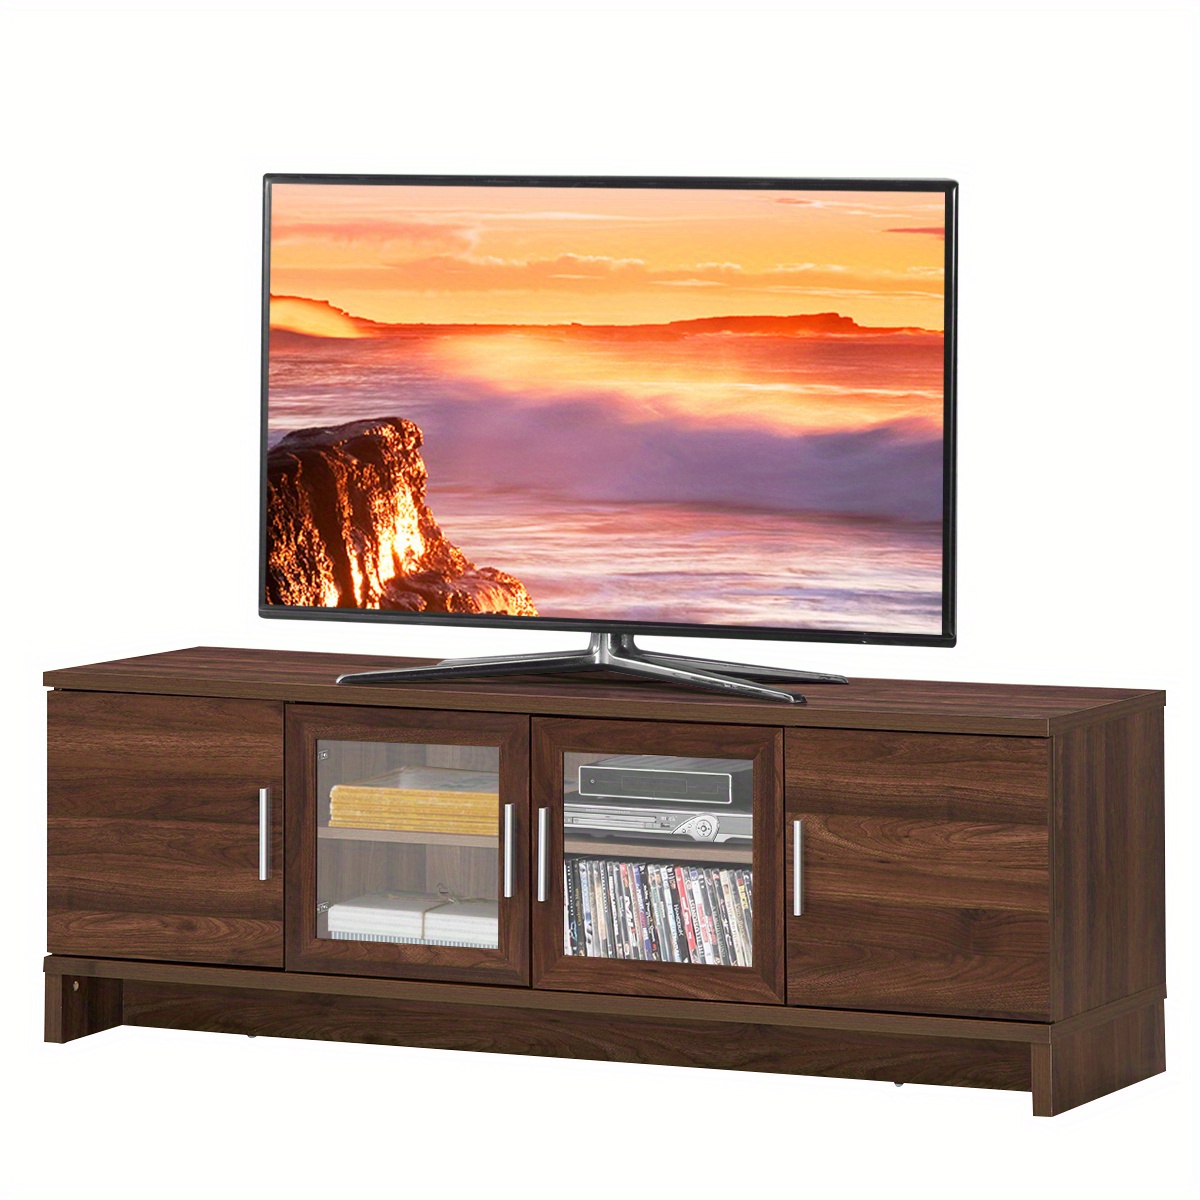 

Lifezeal Tv Stand Media Entertainment Center For Tv's Up To 70" W/ Storage Cabinet Walnut